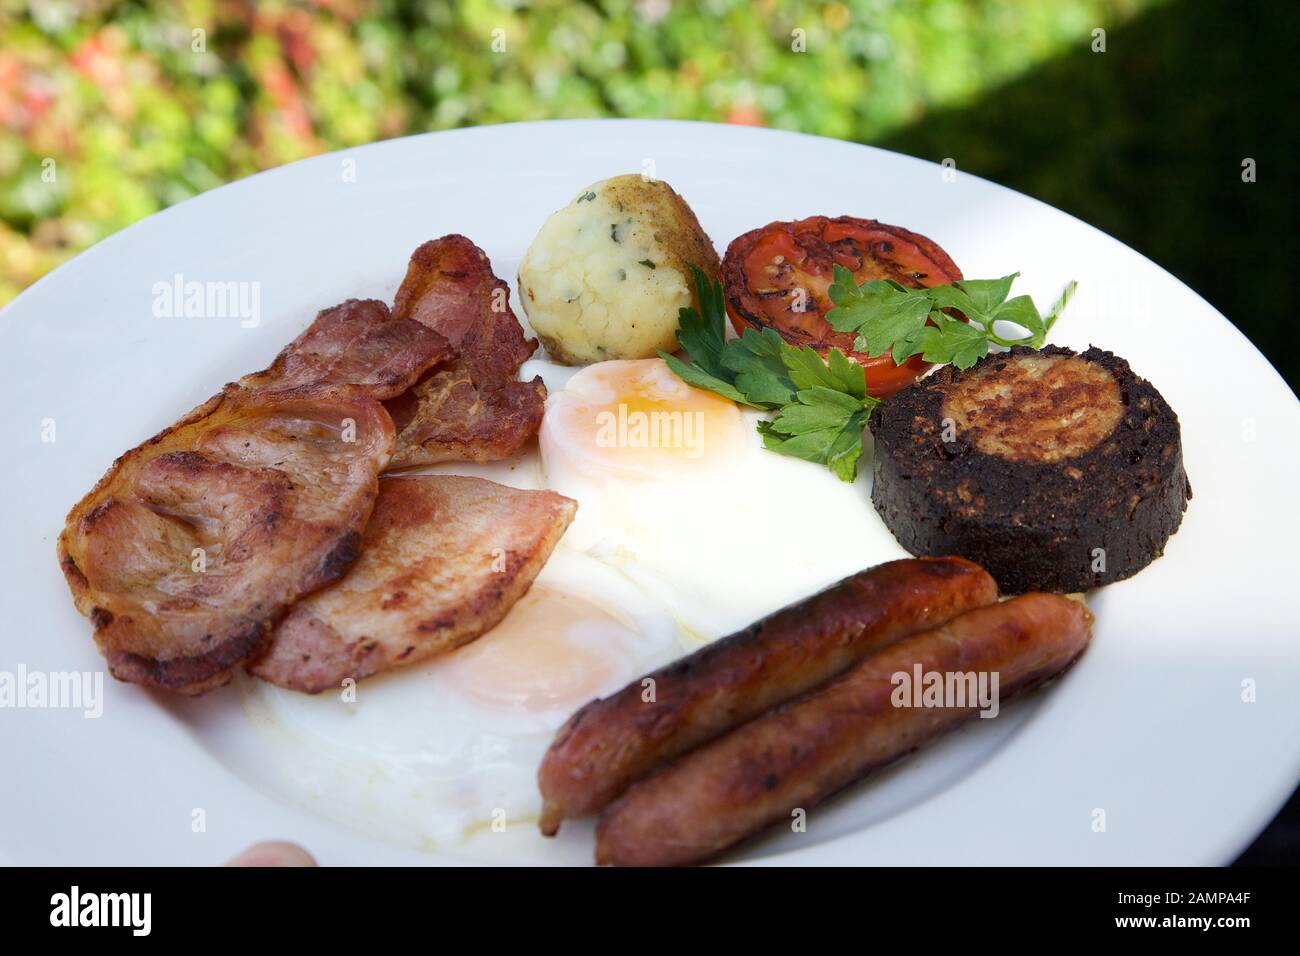 A full Irish breakfast consisting of bacon, egg, sausage, black pudding and grilled tomato. Stock Photo